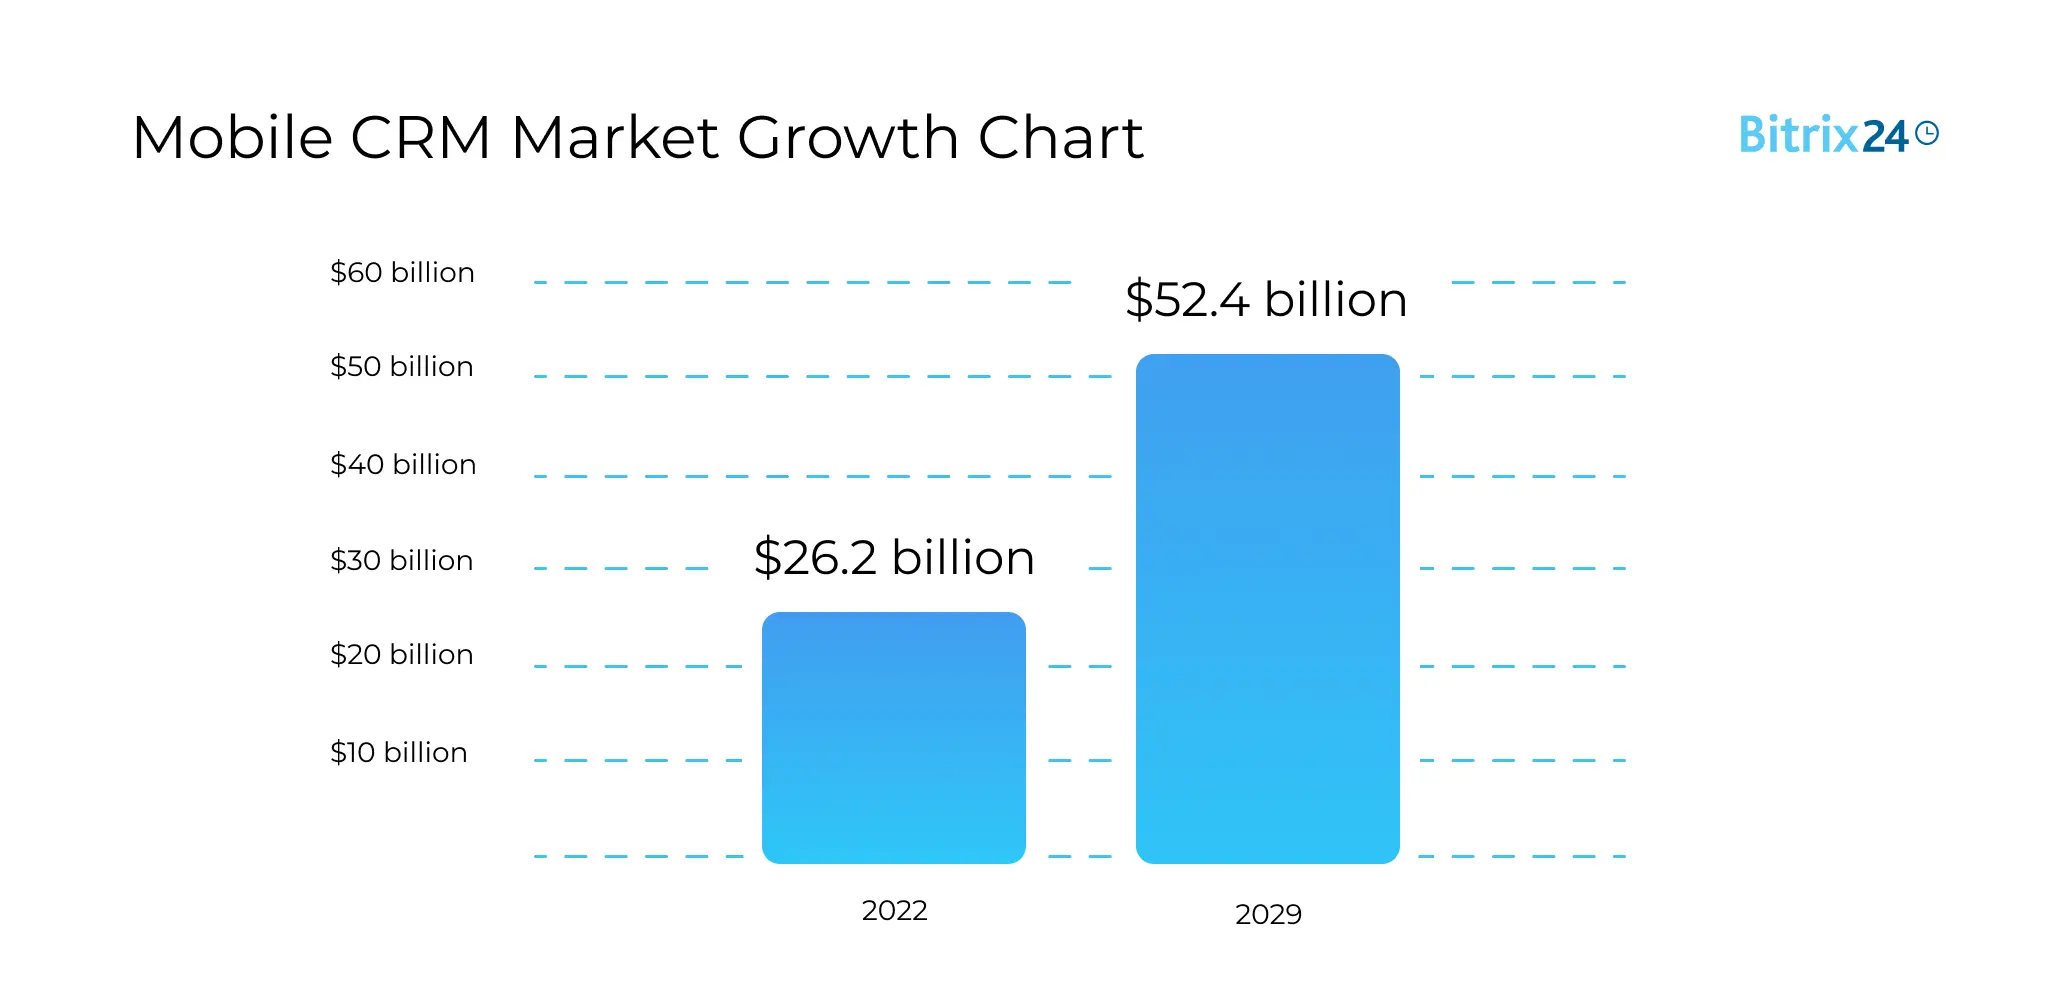 Mobile CRM Market Growth Chart